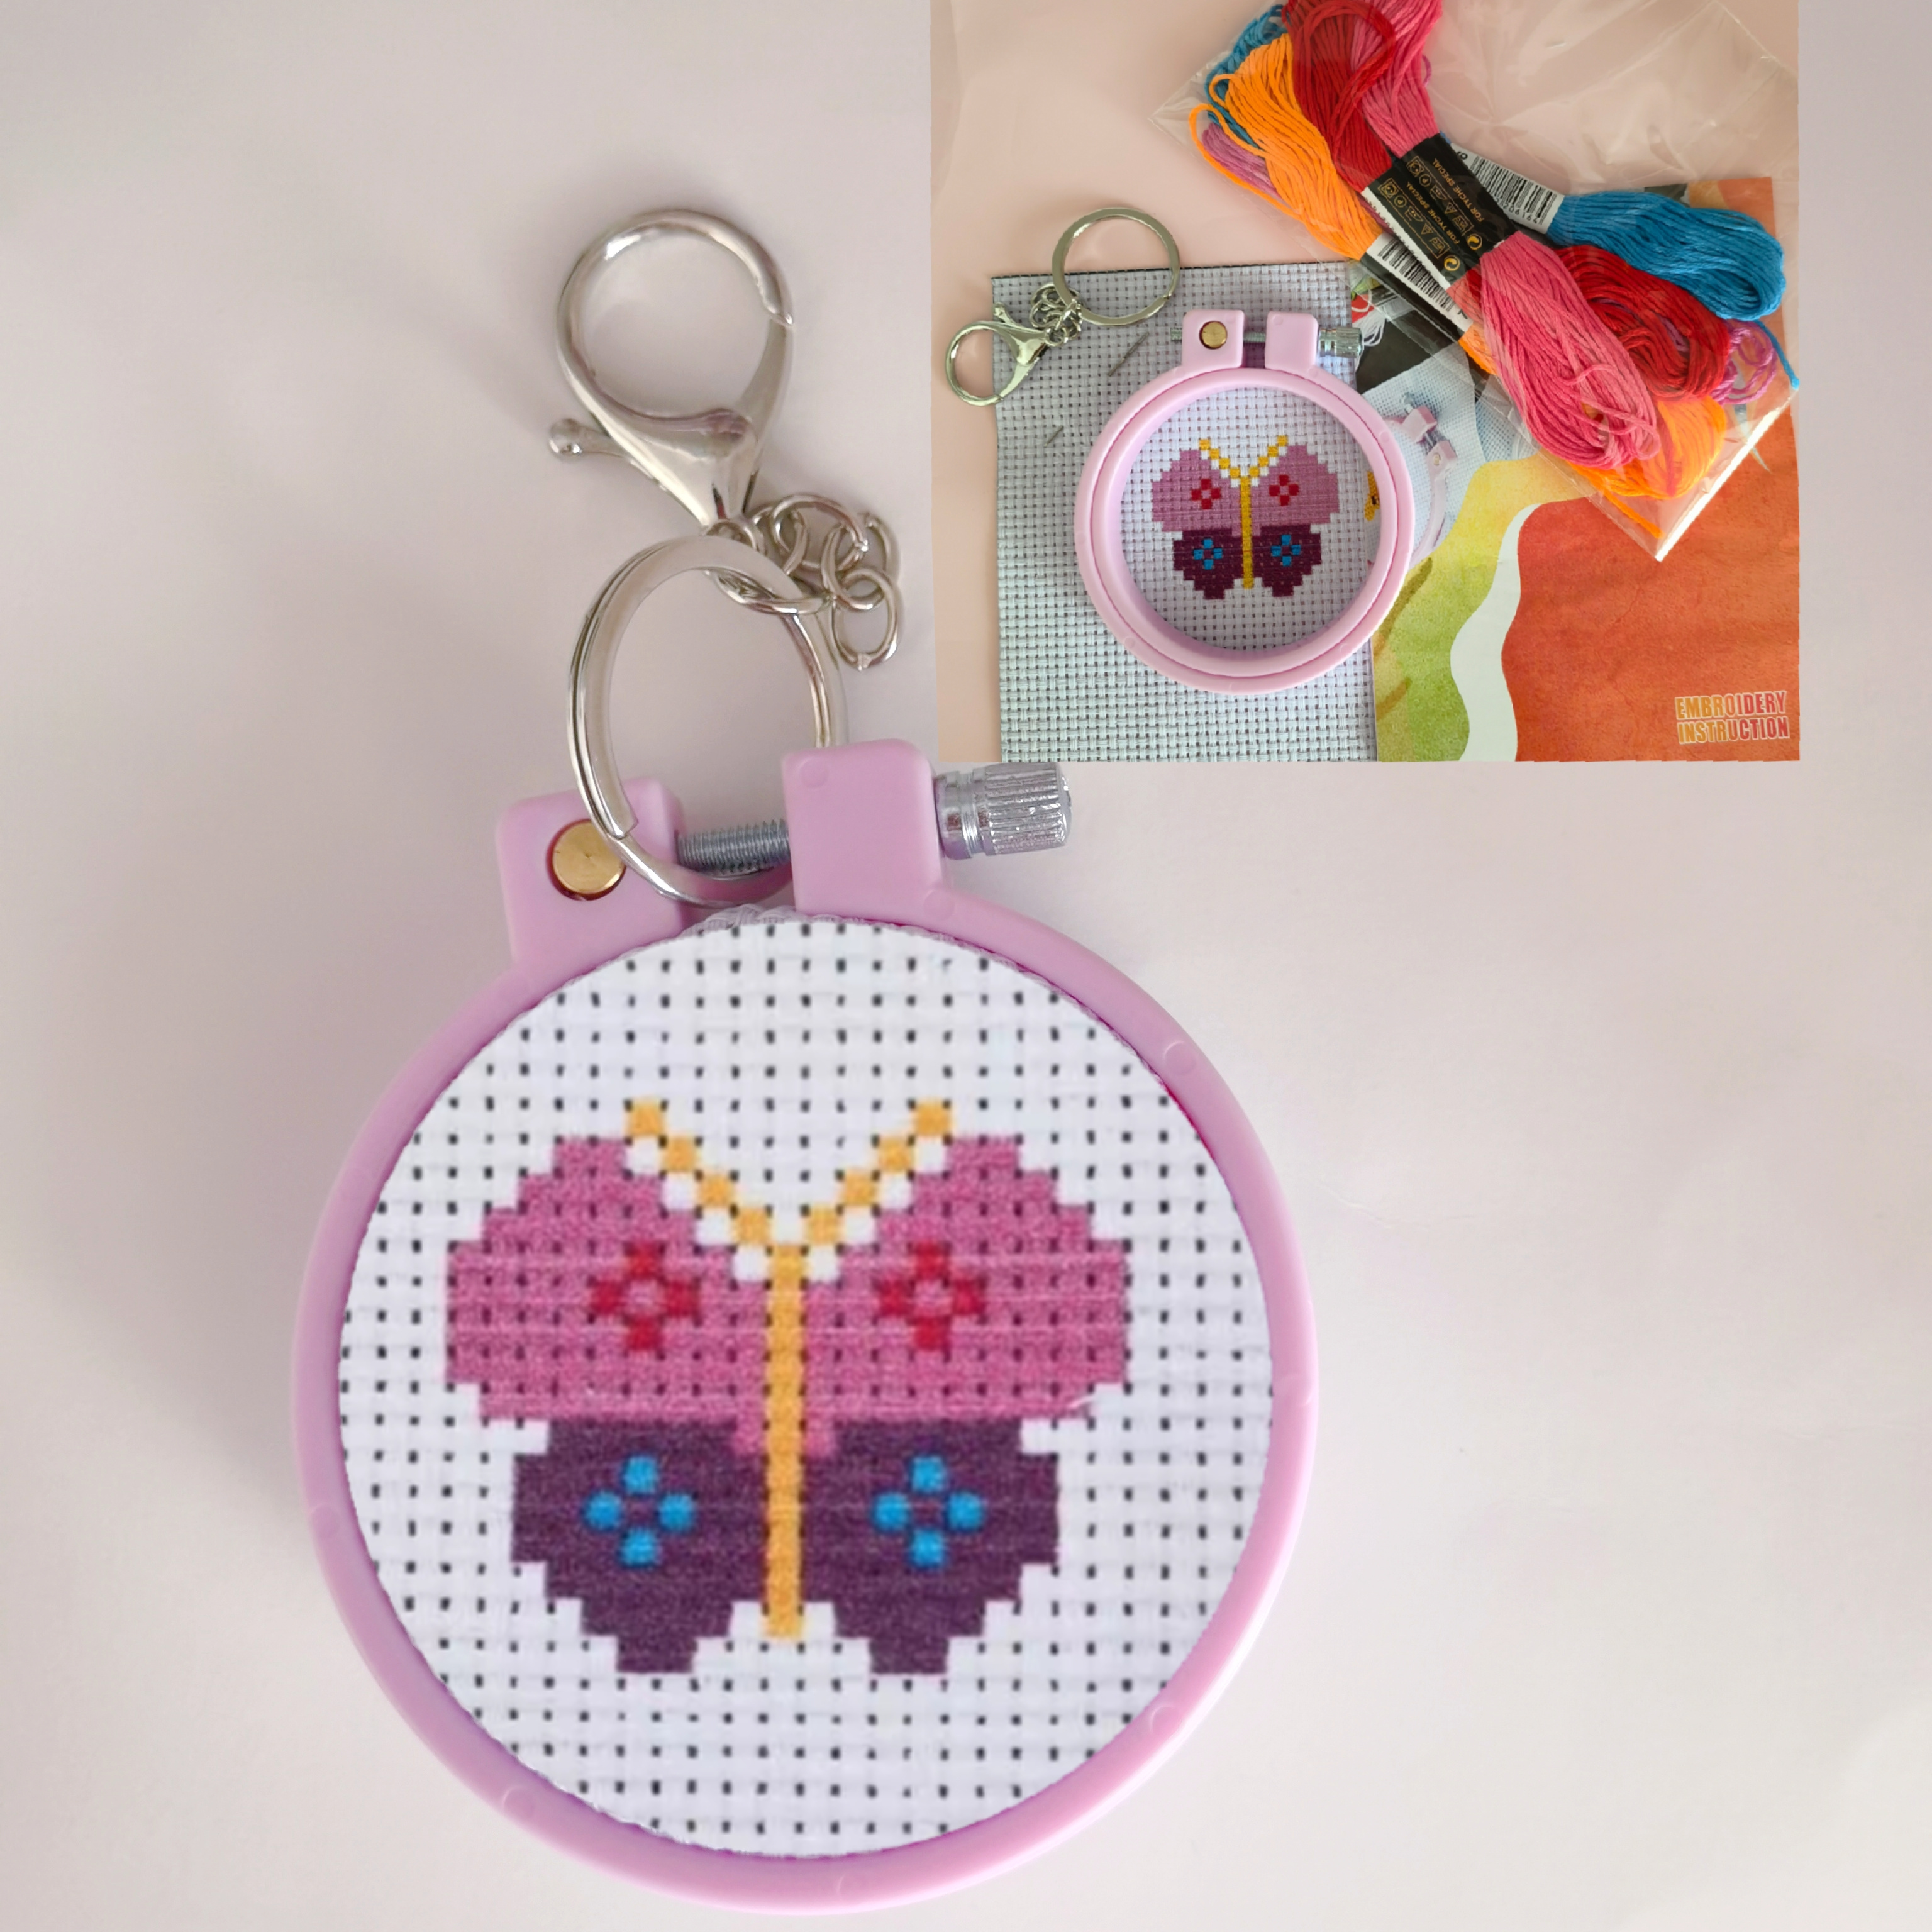 1 Set, Cross Stitch Beginner Kit 1pc Includes 1 Cross Stitch Cloth Stamped  With Pattern+1 Colorful Hoop+1 Key Ring+1 Needle+1 English Instruction+